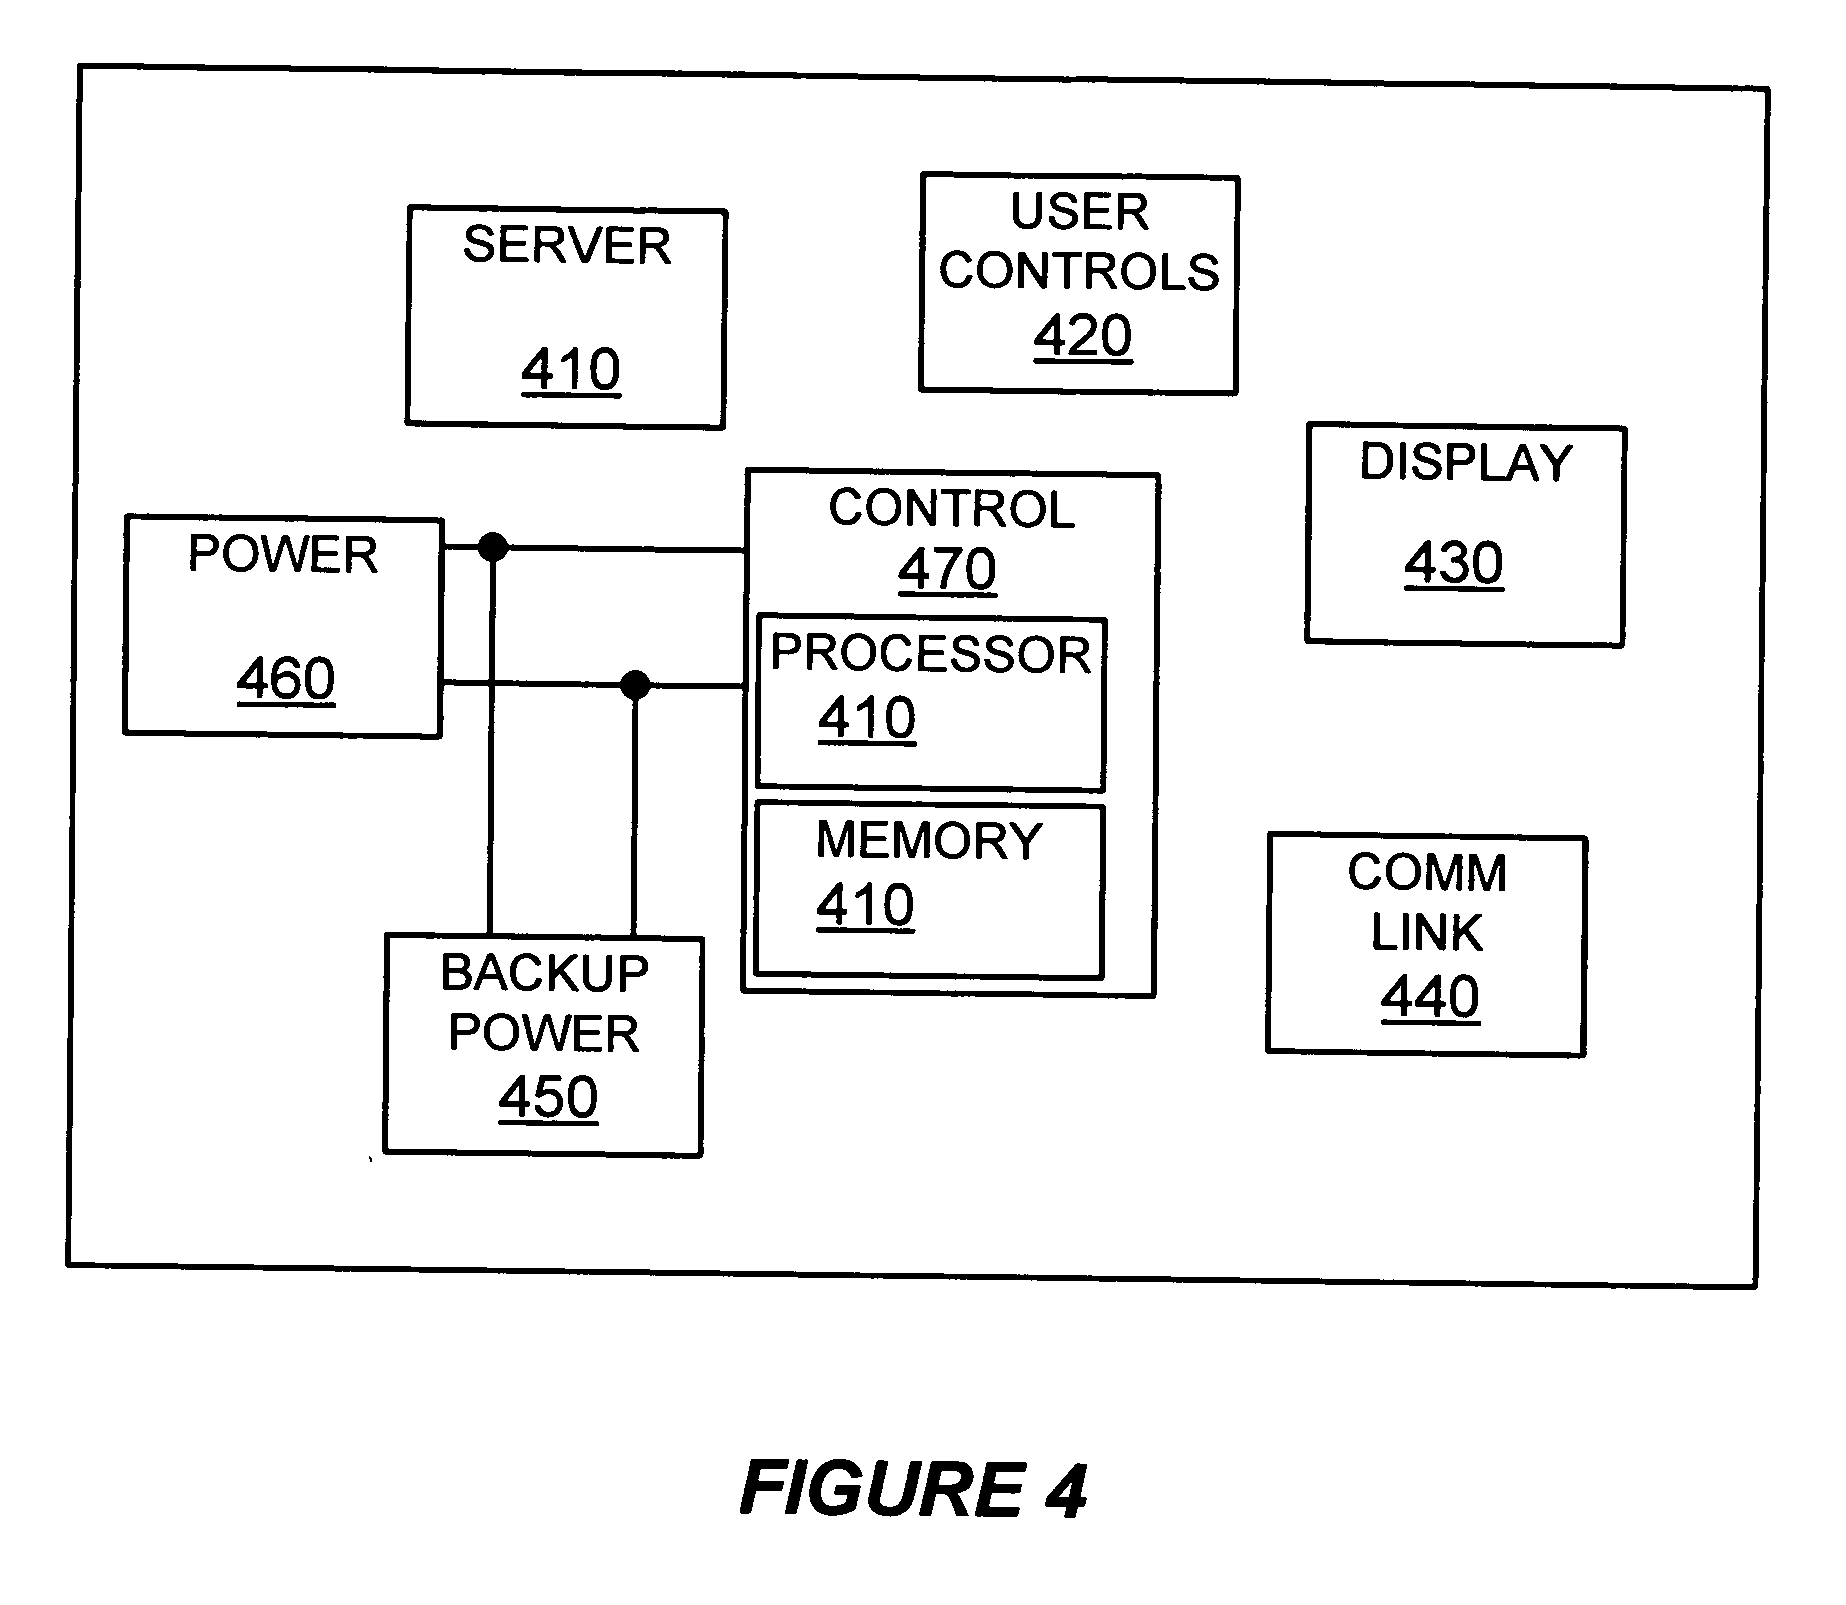 Fast capture and transmission of information in a portable device